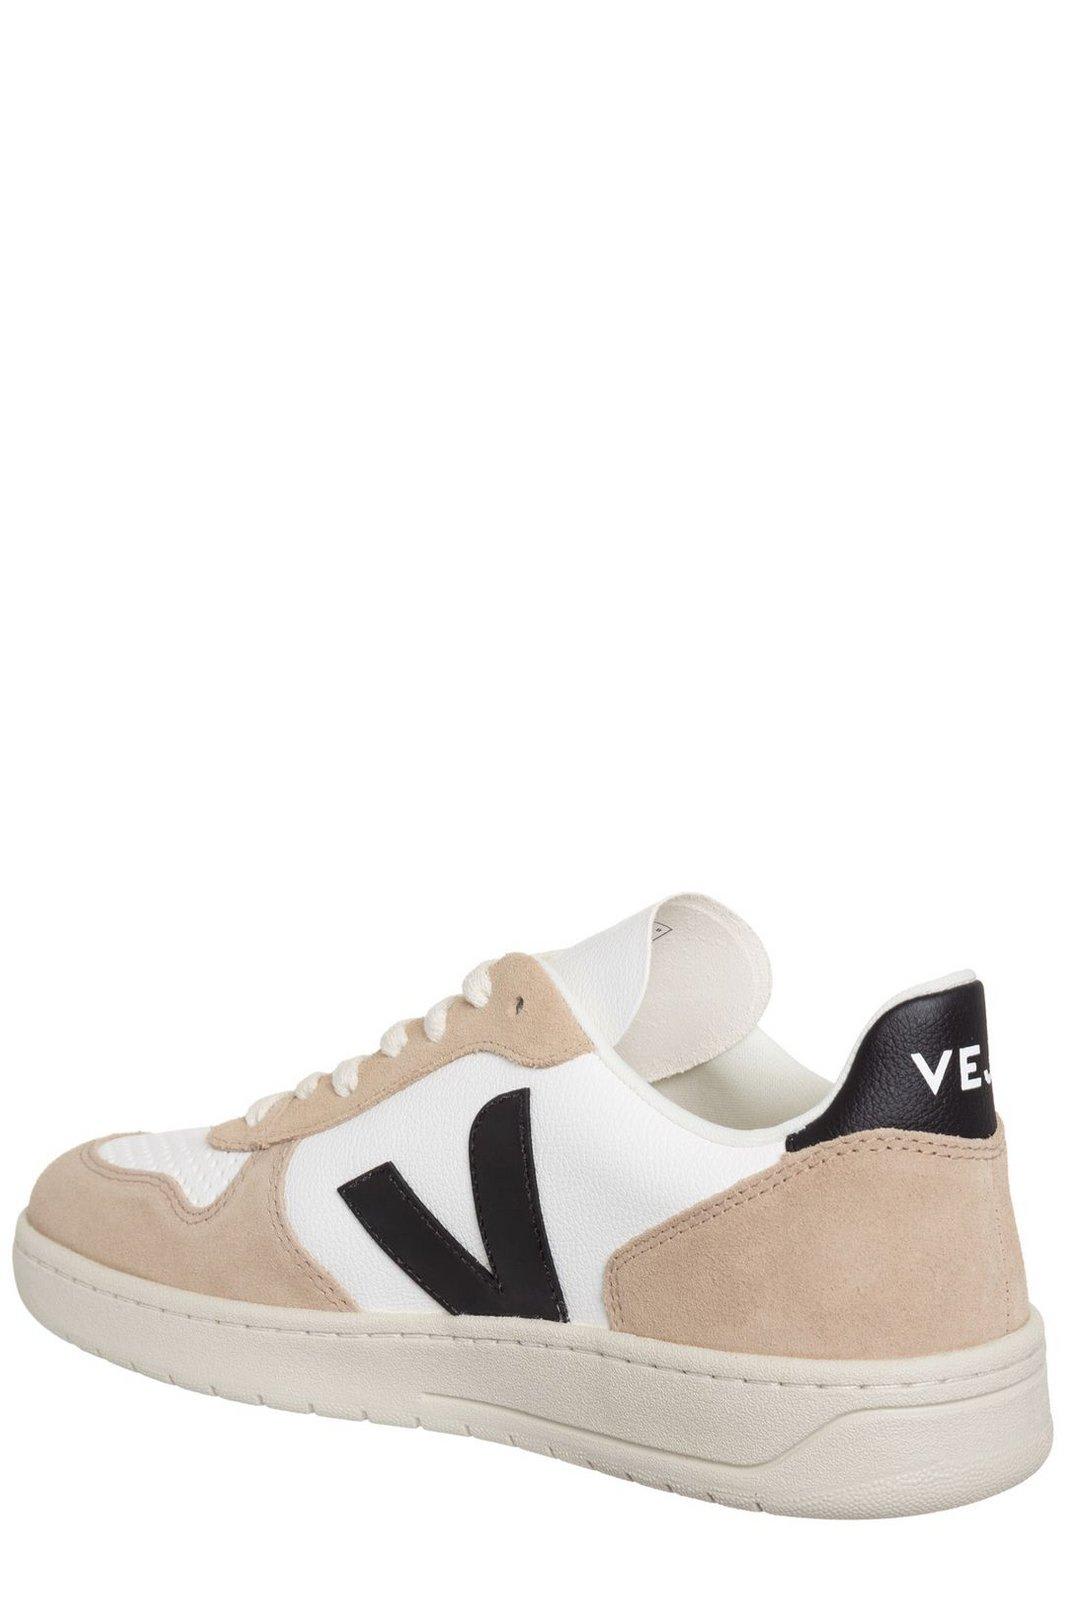 Shop Veja V-10 Panelled Low-top Sneakers In Extra White Black Sahara